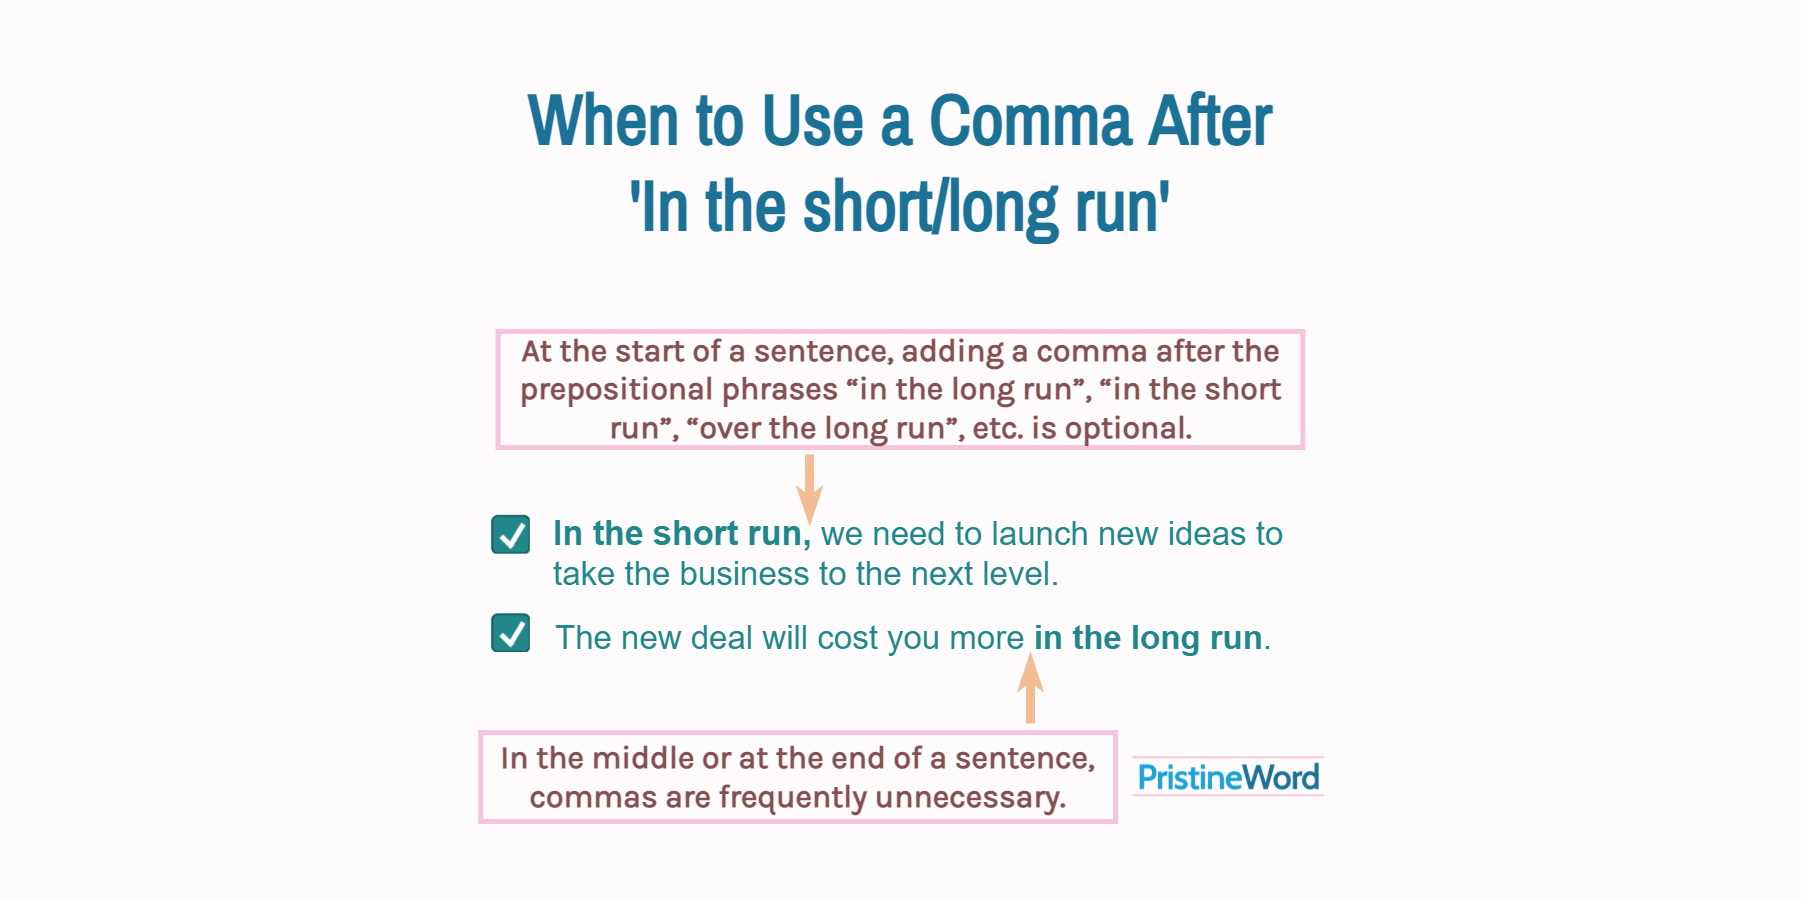 Do You Need a Comma After 'In the short run' or 'In the long run'?